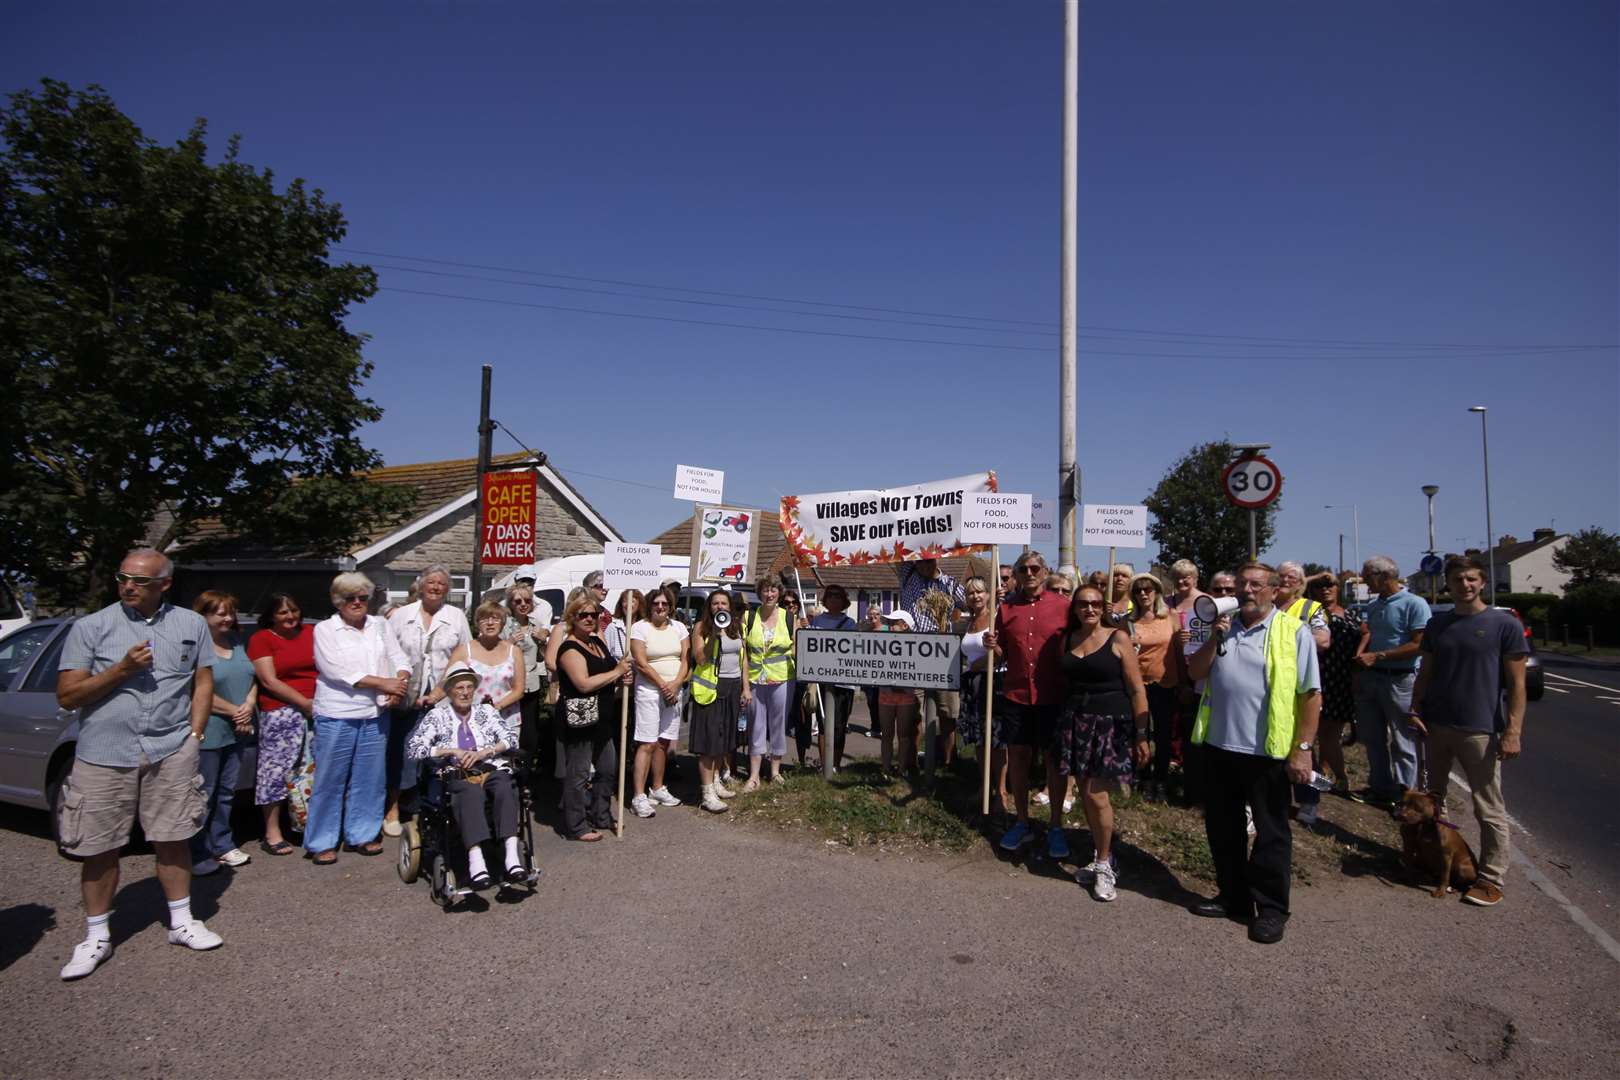 Campaigners protest against the development of Birchington